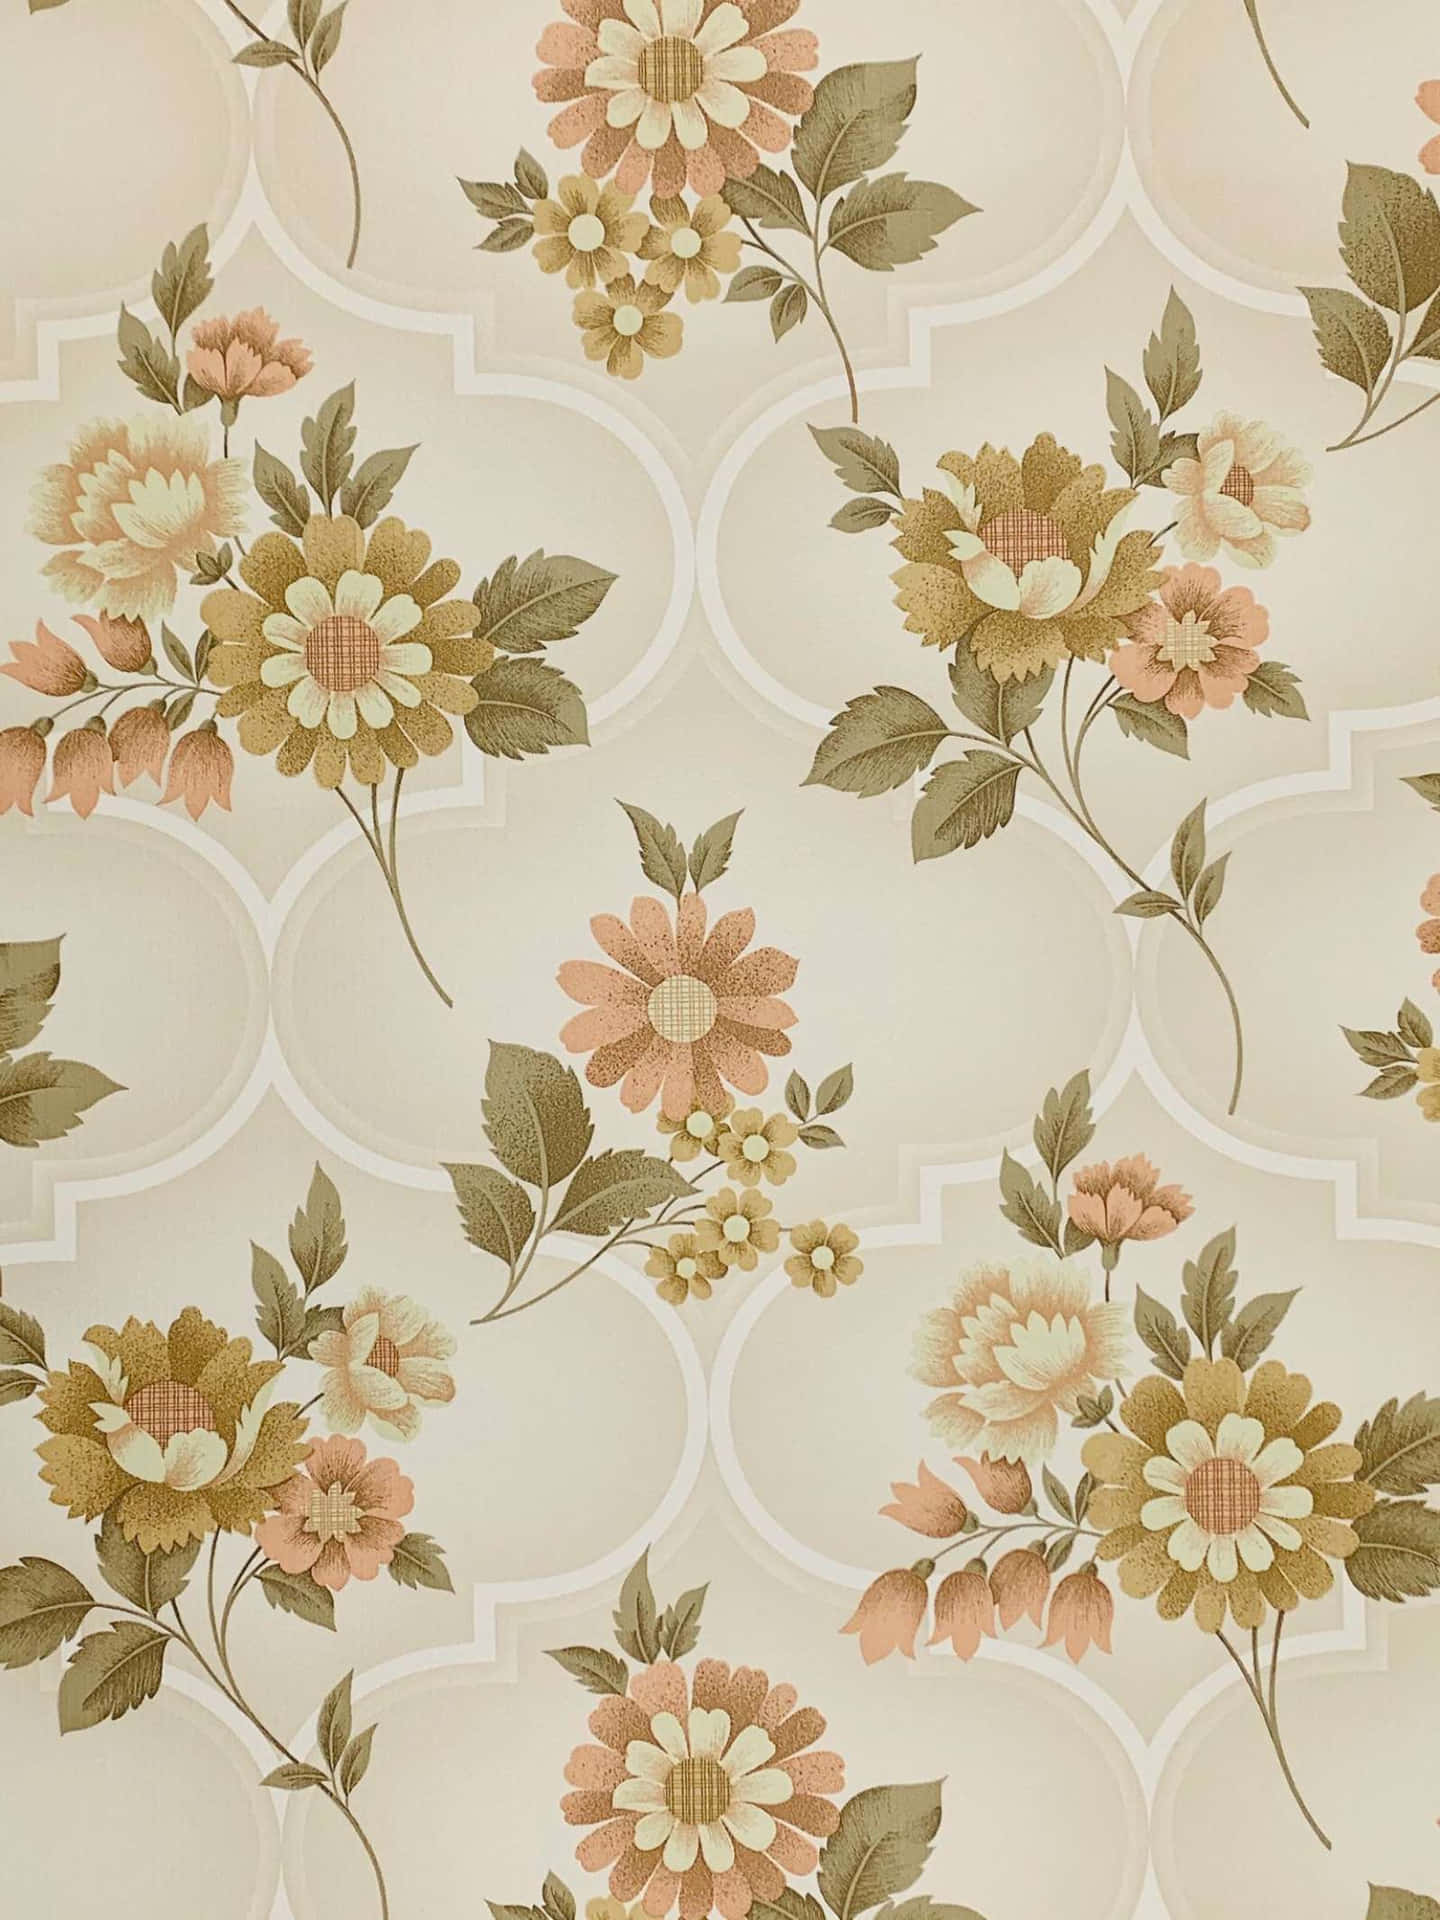 A Wallpaper With Flowers And Leaves On It